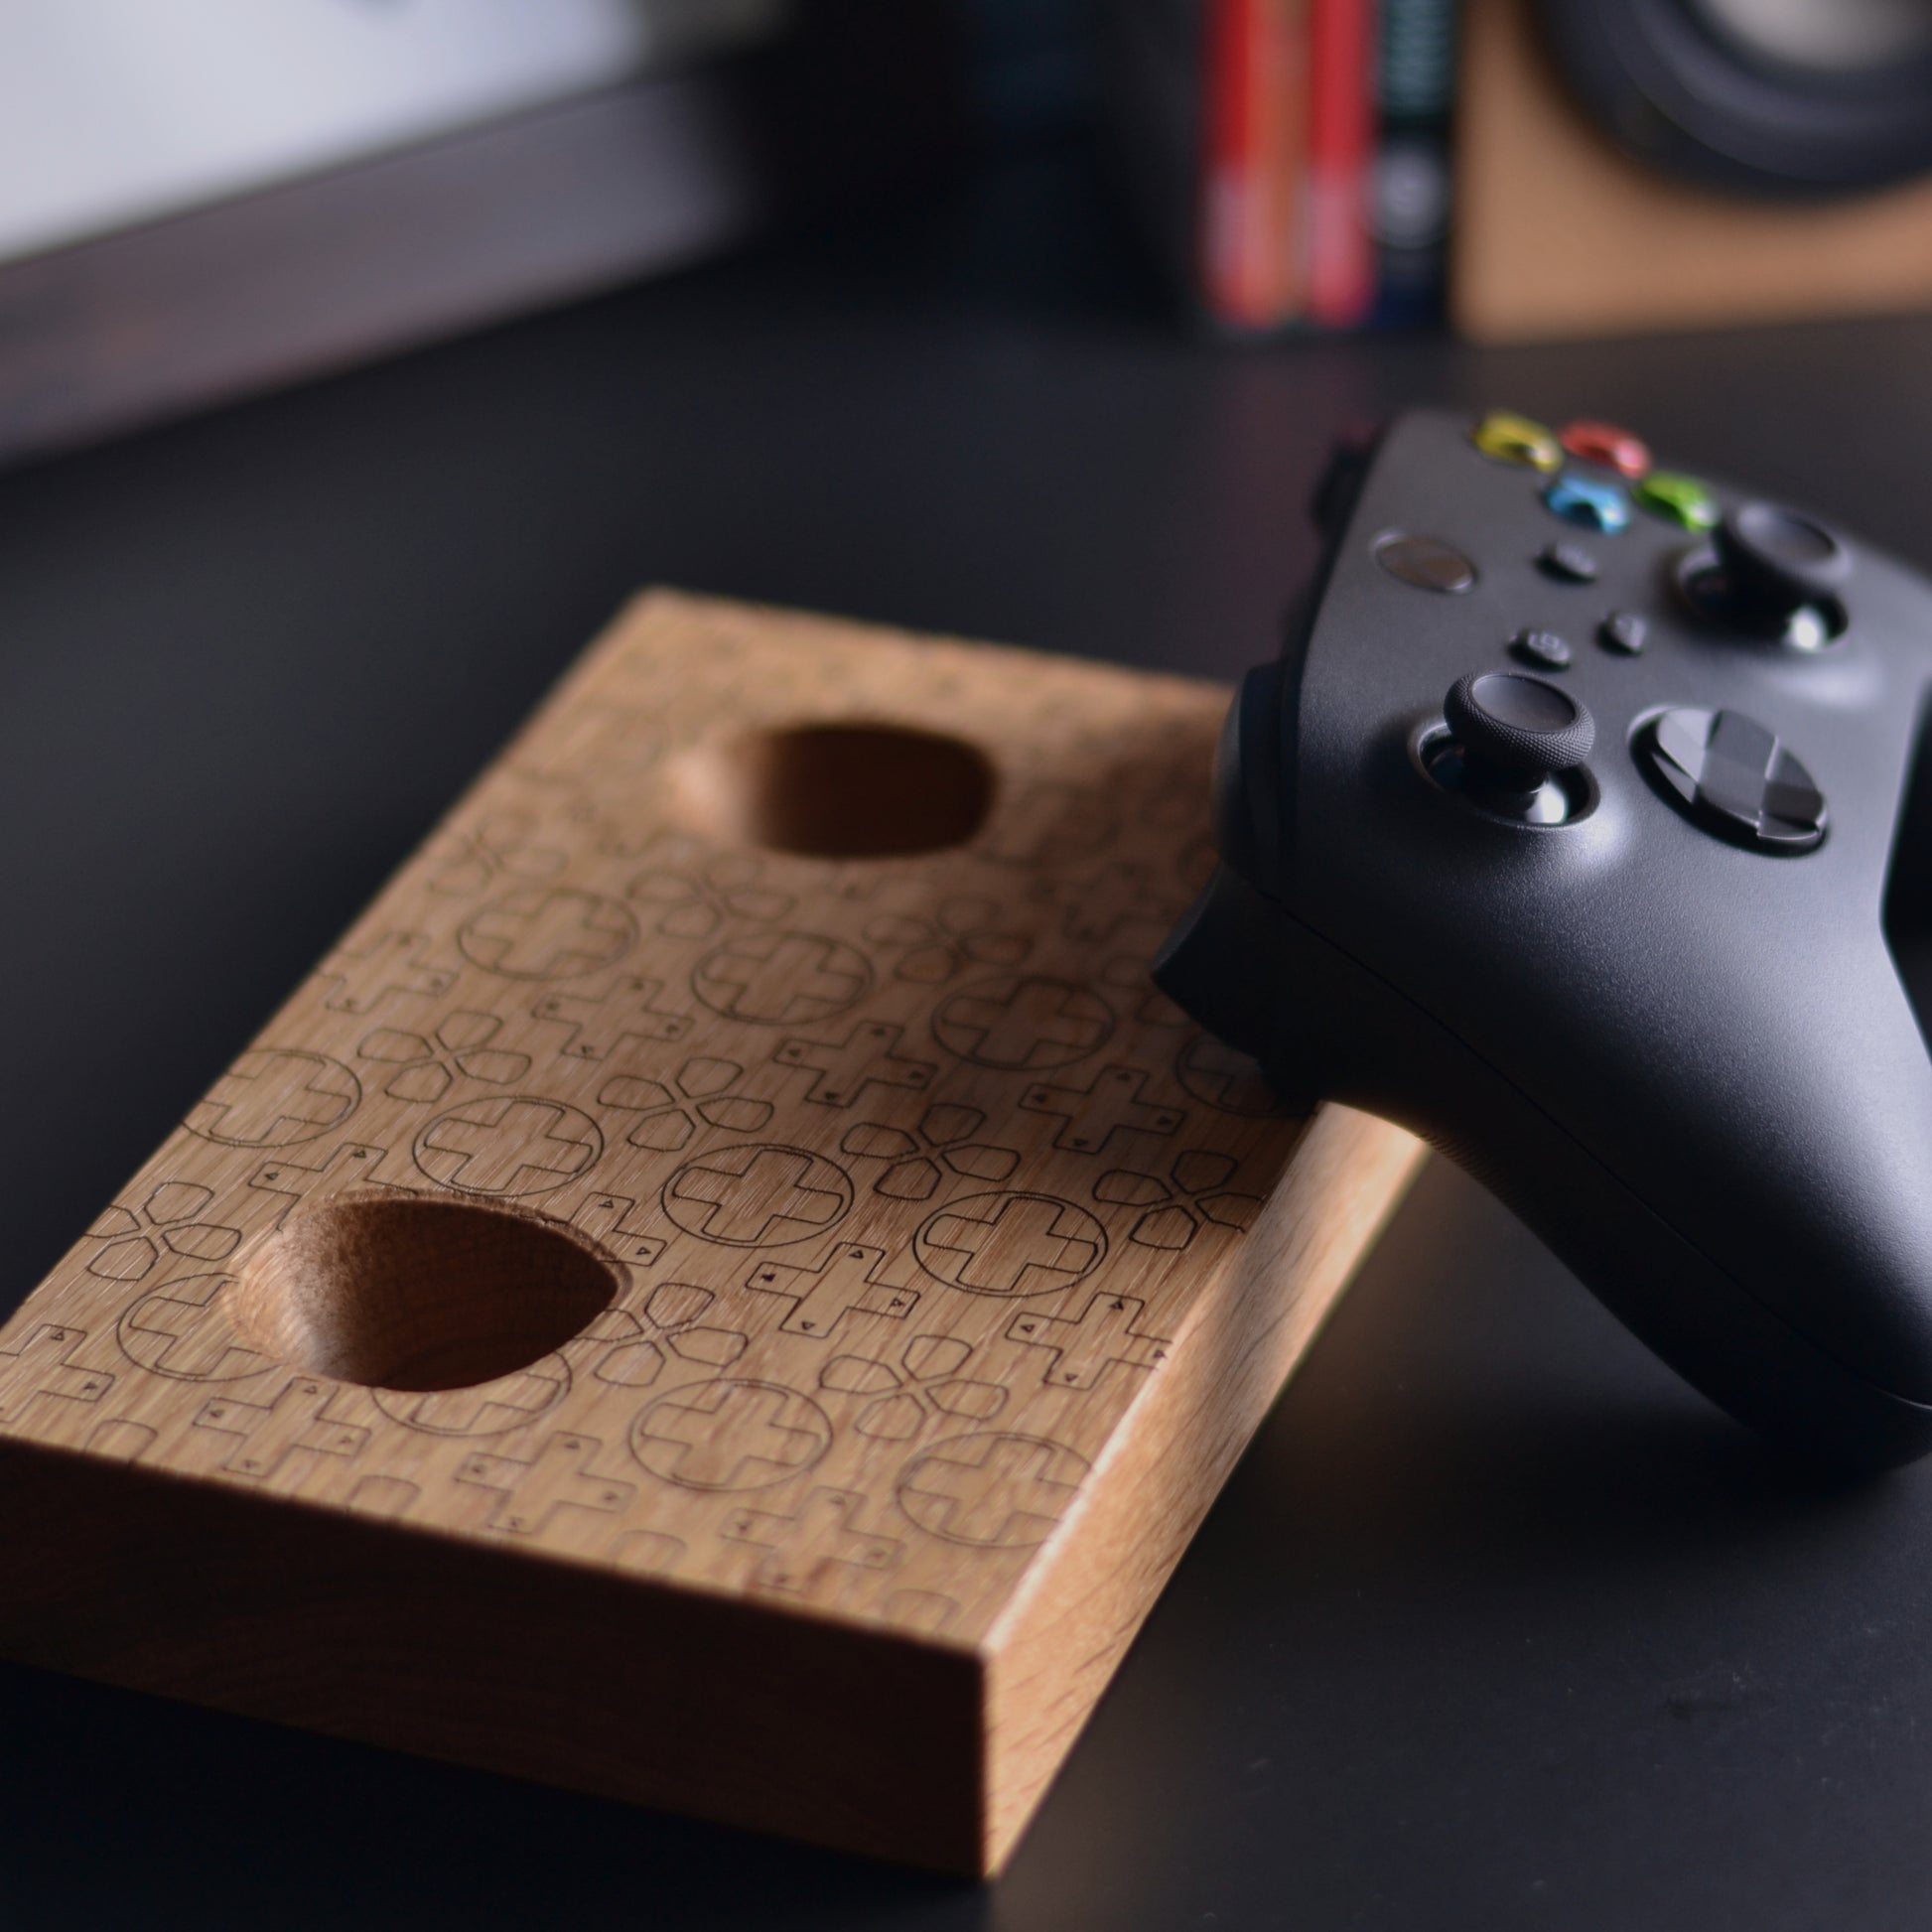 Wooden stand with d-pad design for Xbox series X|S controller